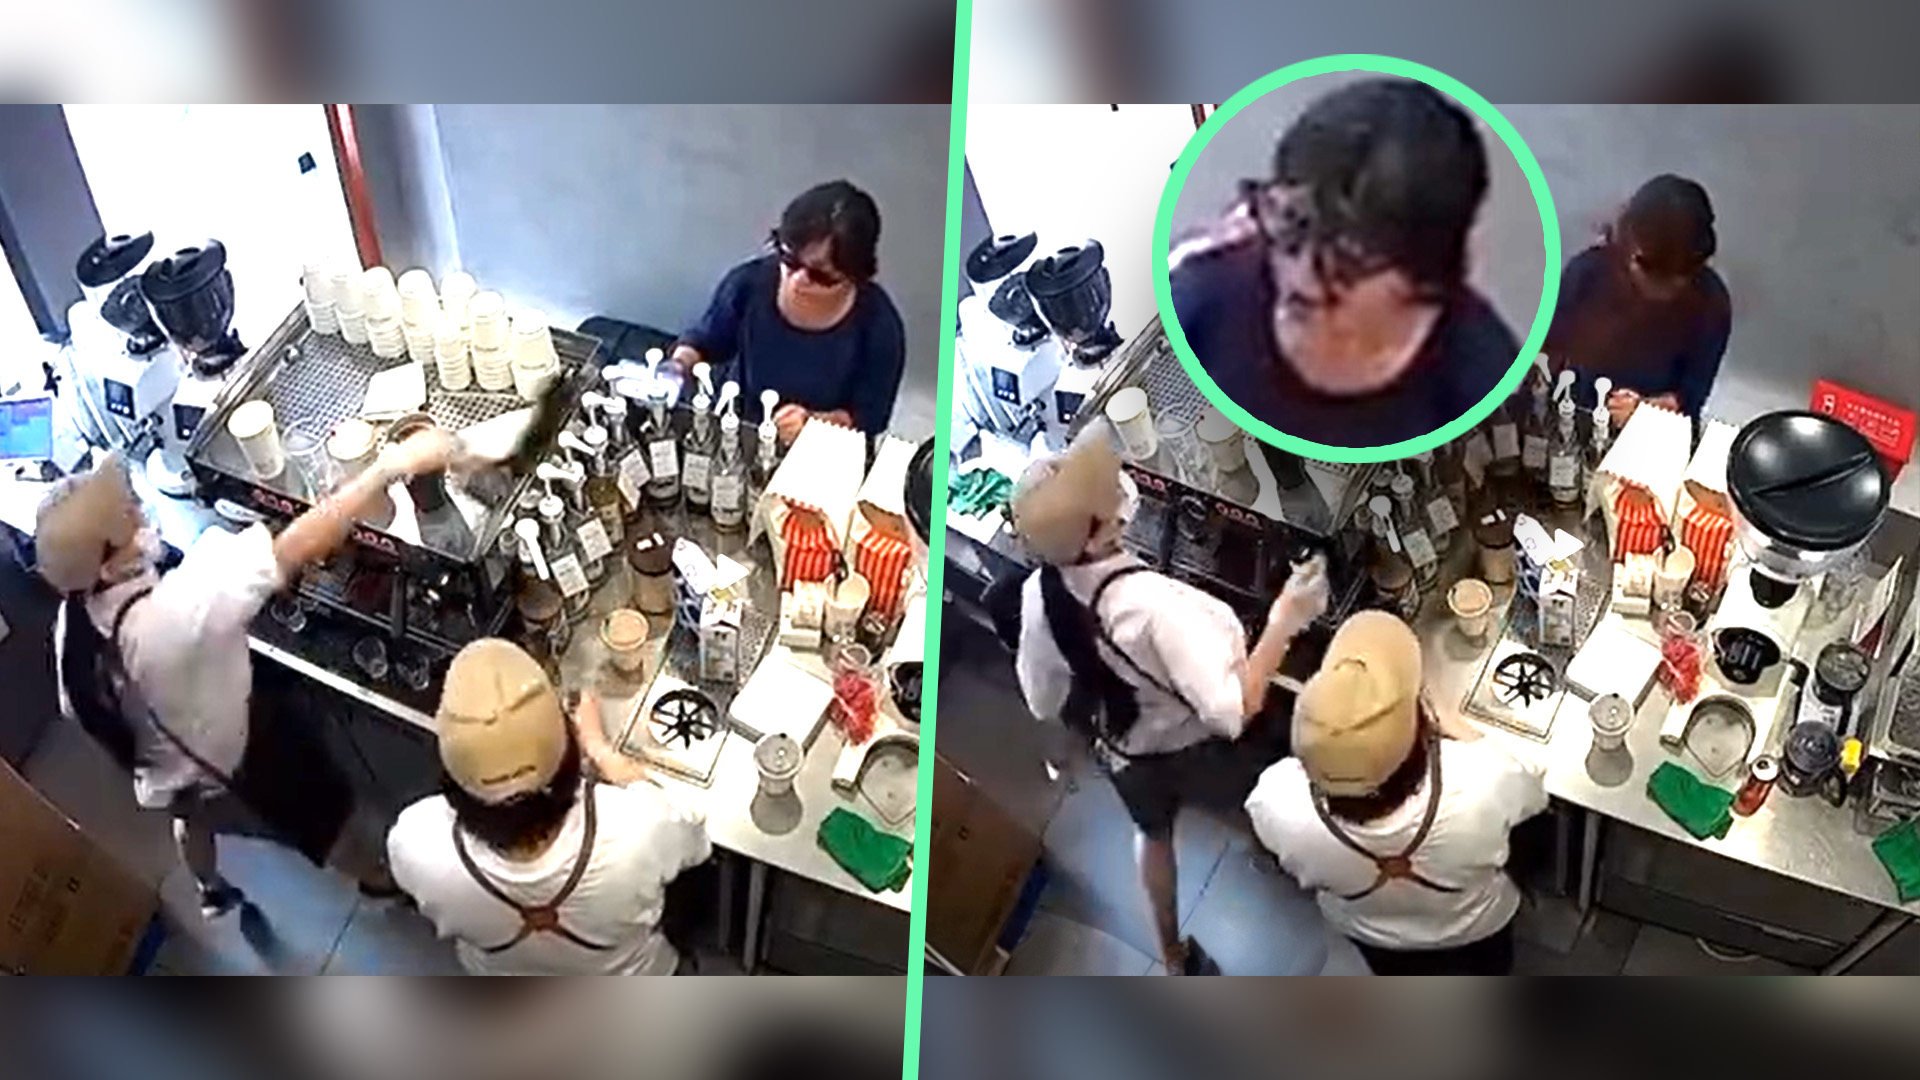 A well-known coffee shop chain in China has come under pressure about working conditions after a slew of staff meltdowns were caught on camera and posted online. Photo: SCMP composite/Weibo